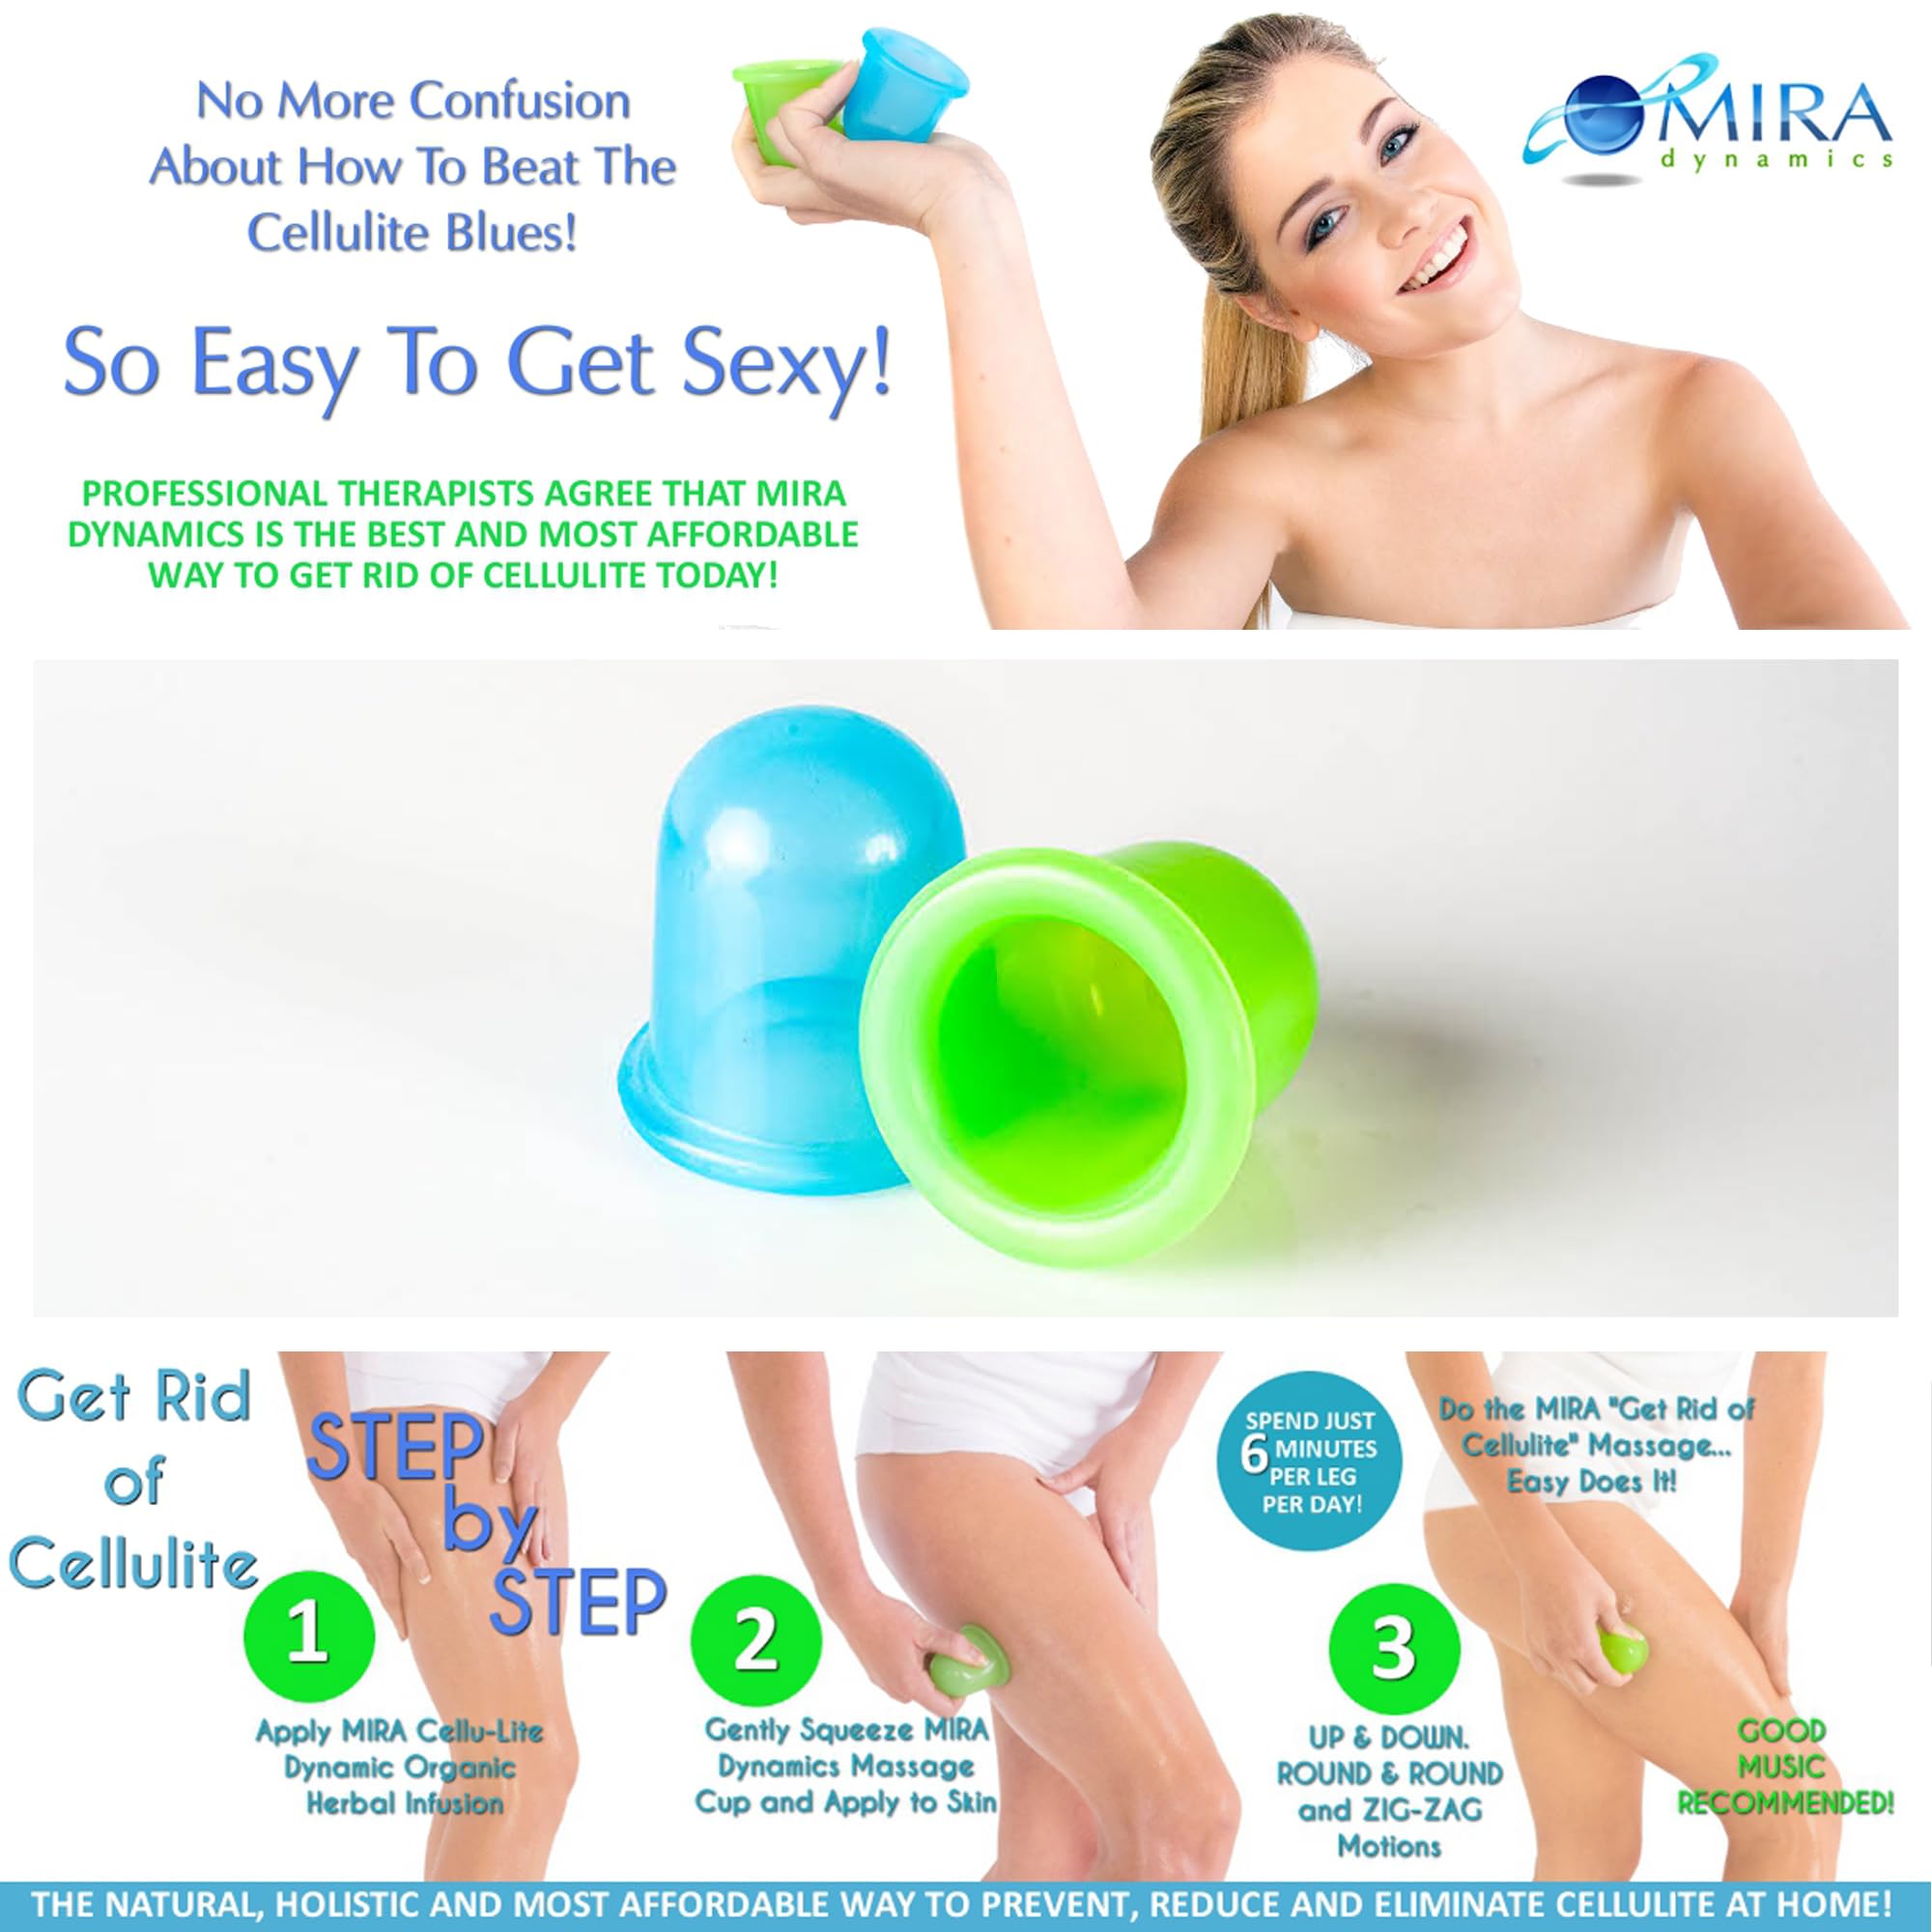 Mira Dynamics Massage Cups for Cupping Therapy - 2 Silicone Cups Set - Hard & Soft - Anti-Cellulite Massager - Vacuum Suction Cup for Cellulite Treatment - Amazing Cellulite Remover